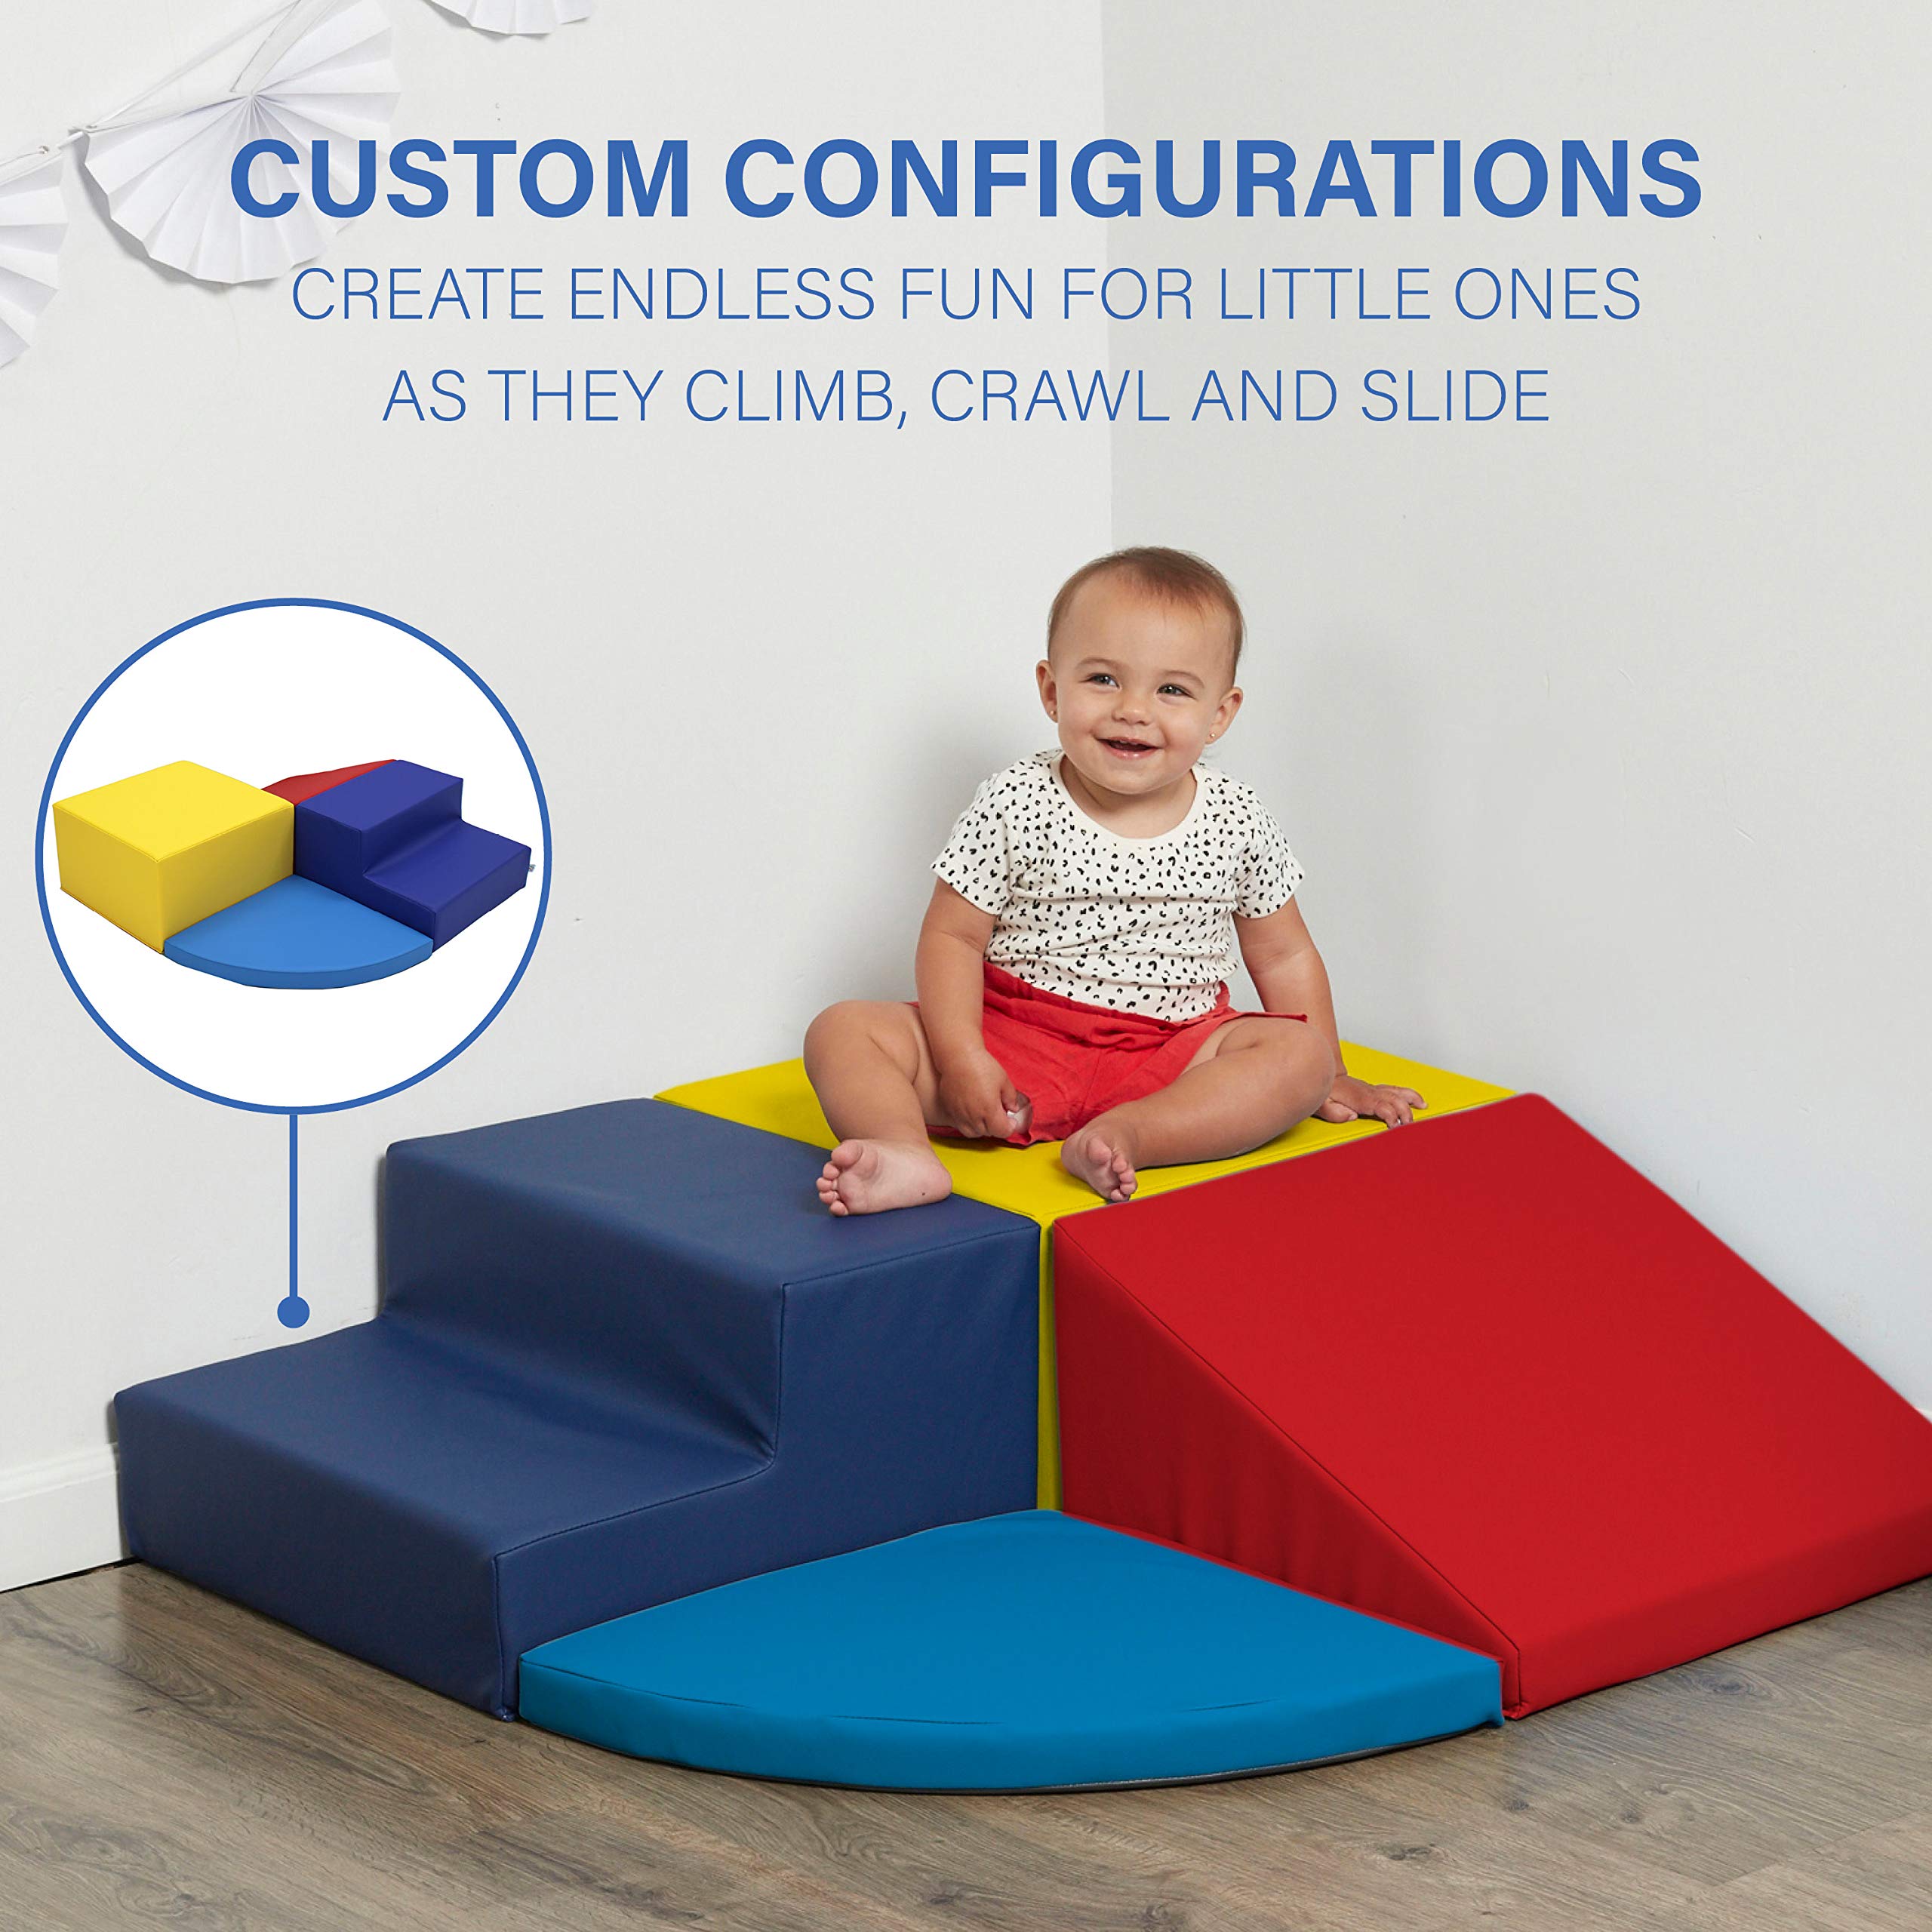 Factory Direct Partners 11619-BLRD SoftScape Toddler Playtime Corner Climber, Indoor Active Play Structure (4-Piece Set) - Blue/Red